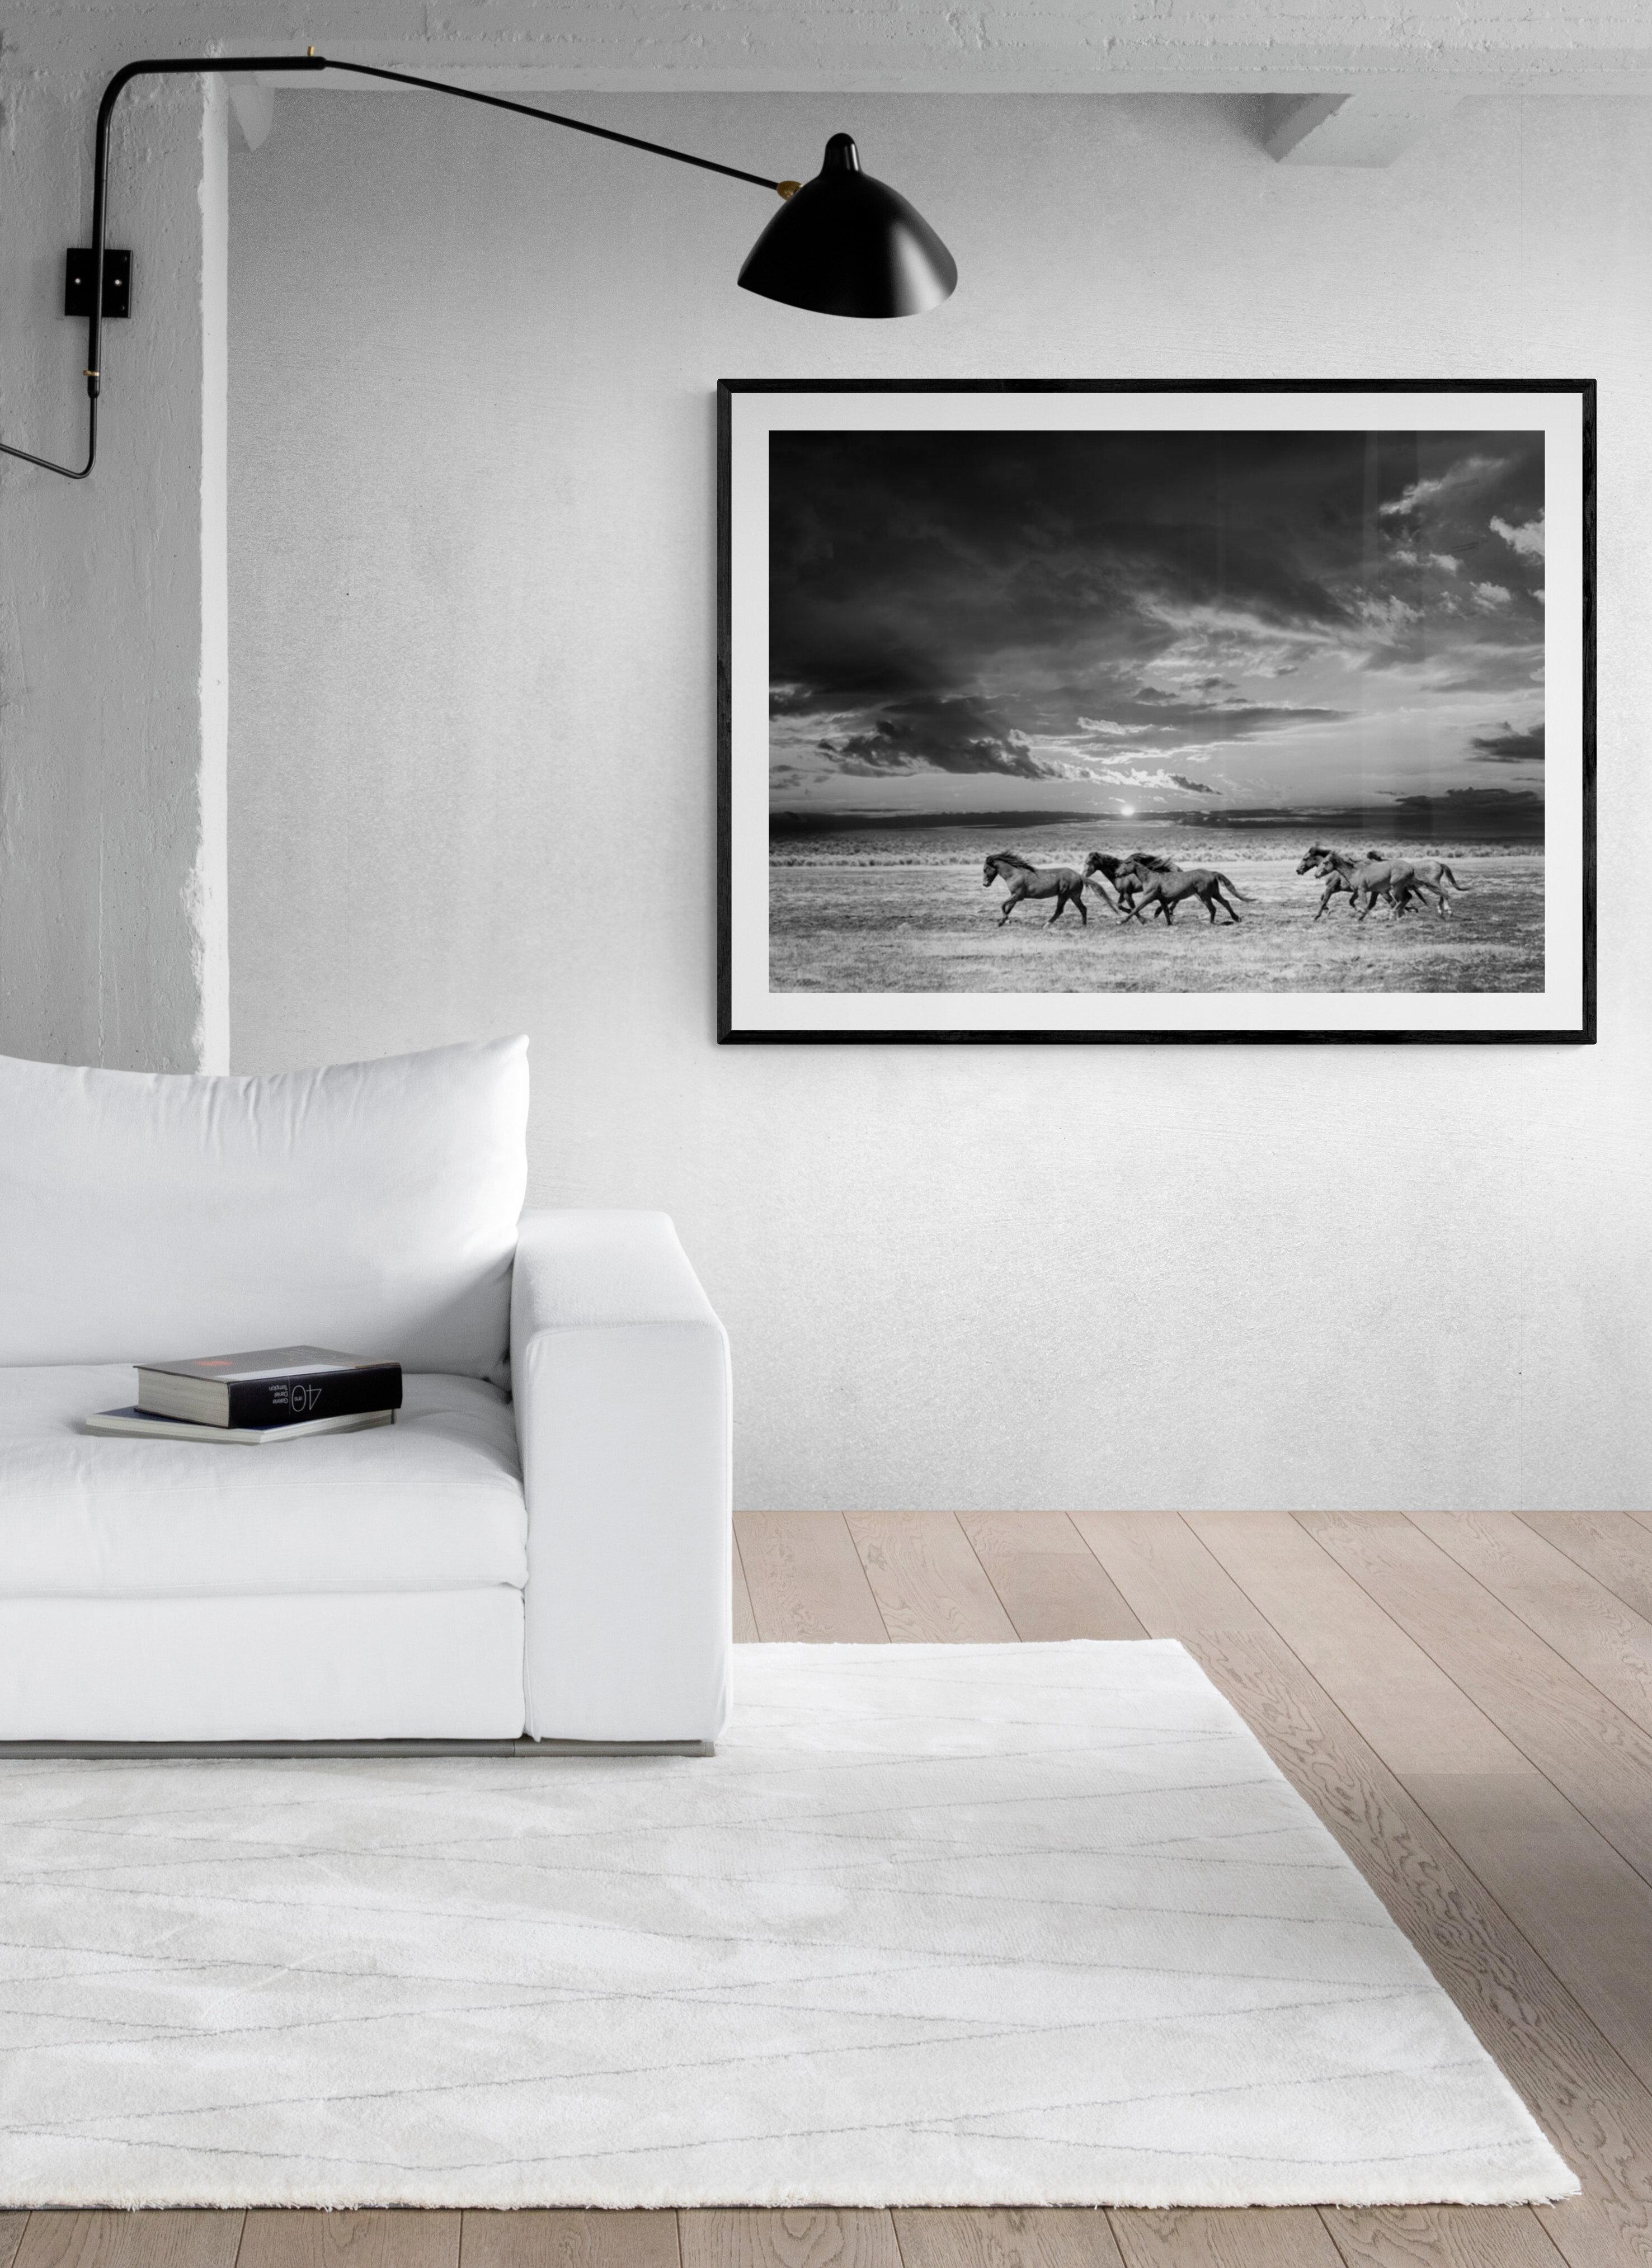 36x48 Photography of Wild Horses - Mustangs Photograph Print Sunset Landscape 1